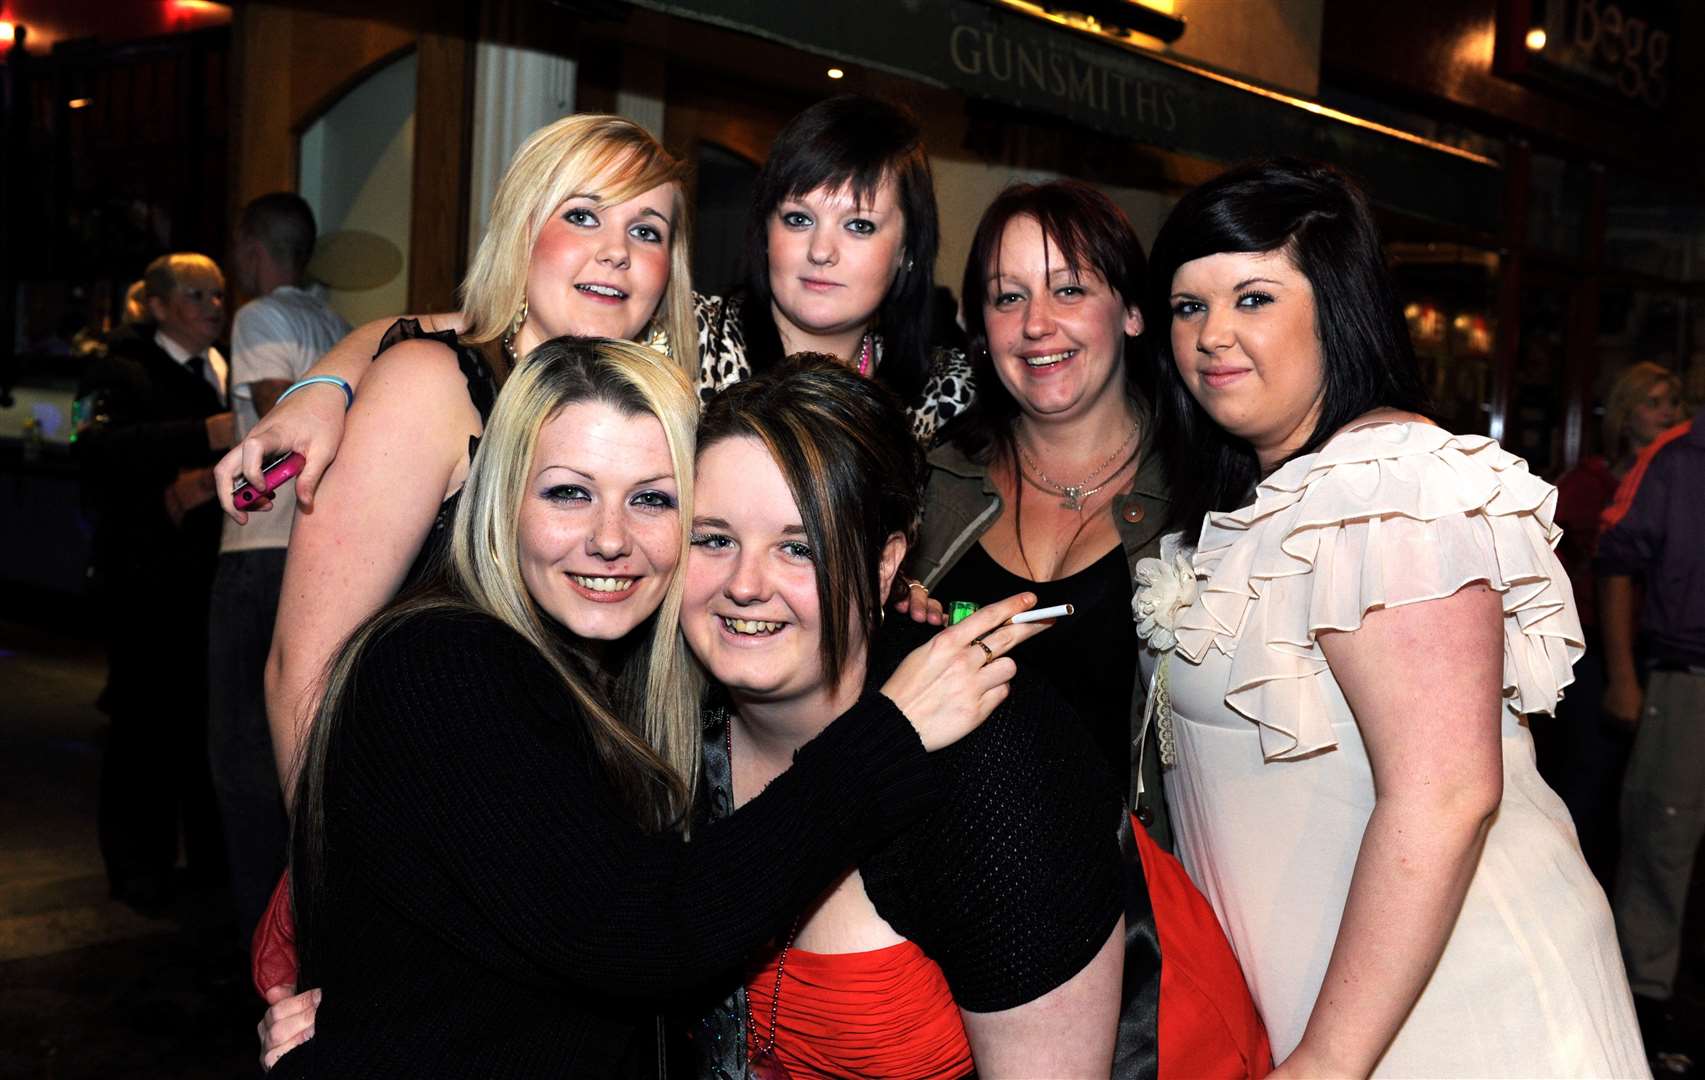 Cityseen 15th Oct 2011. Nikki Maclennan (red dress) out with the girls for her 21st birthday..